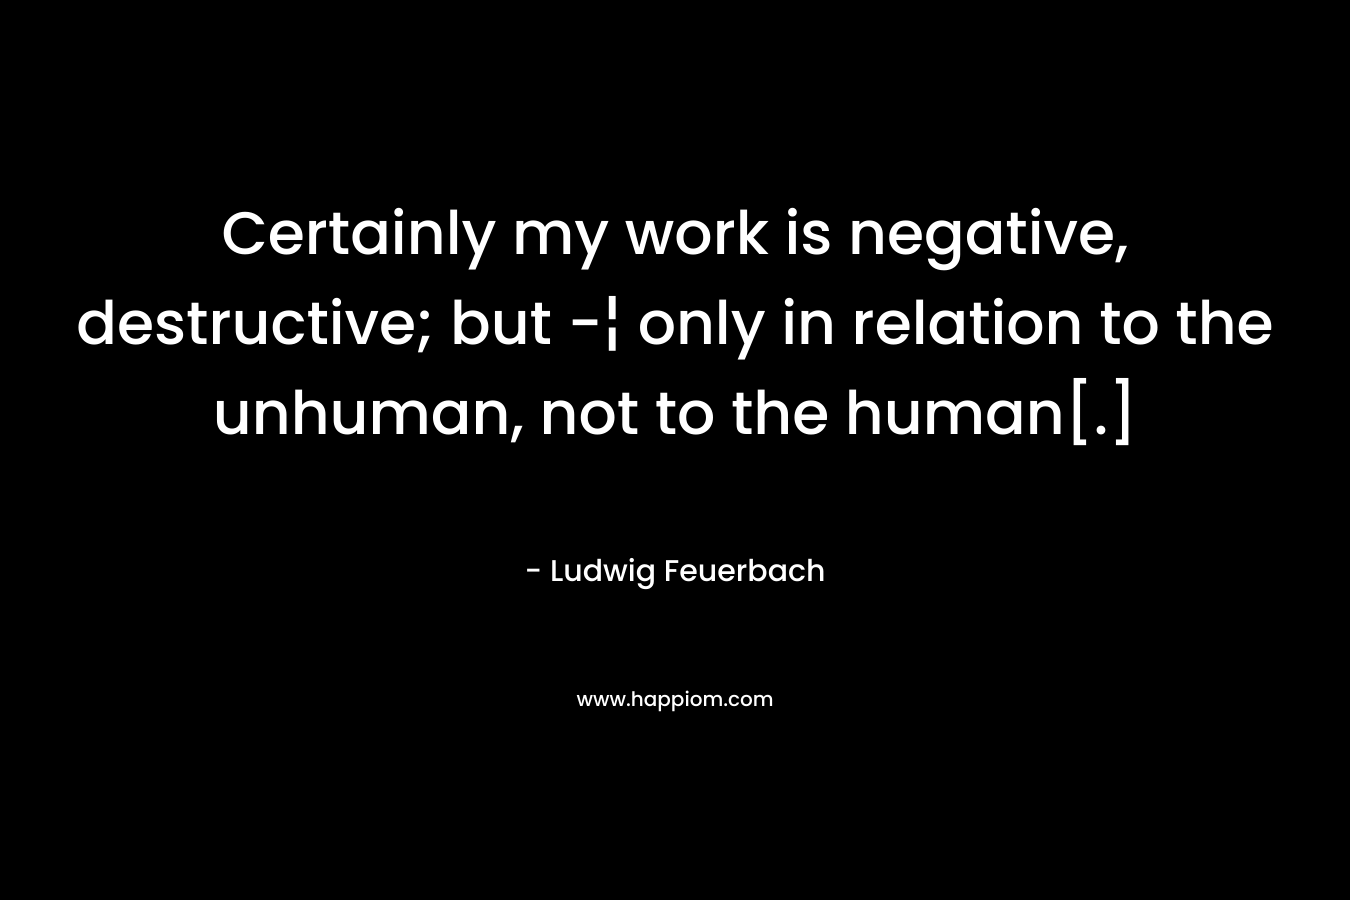 Certainly my work is negative, destructive; but -¦ only in relation to the unhuman, not to the human[.] – Ludwig Feuerbach